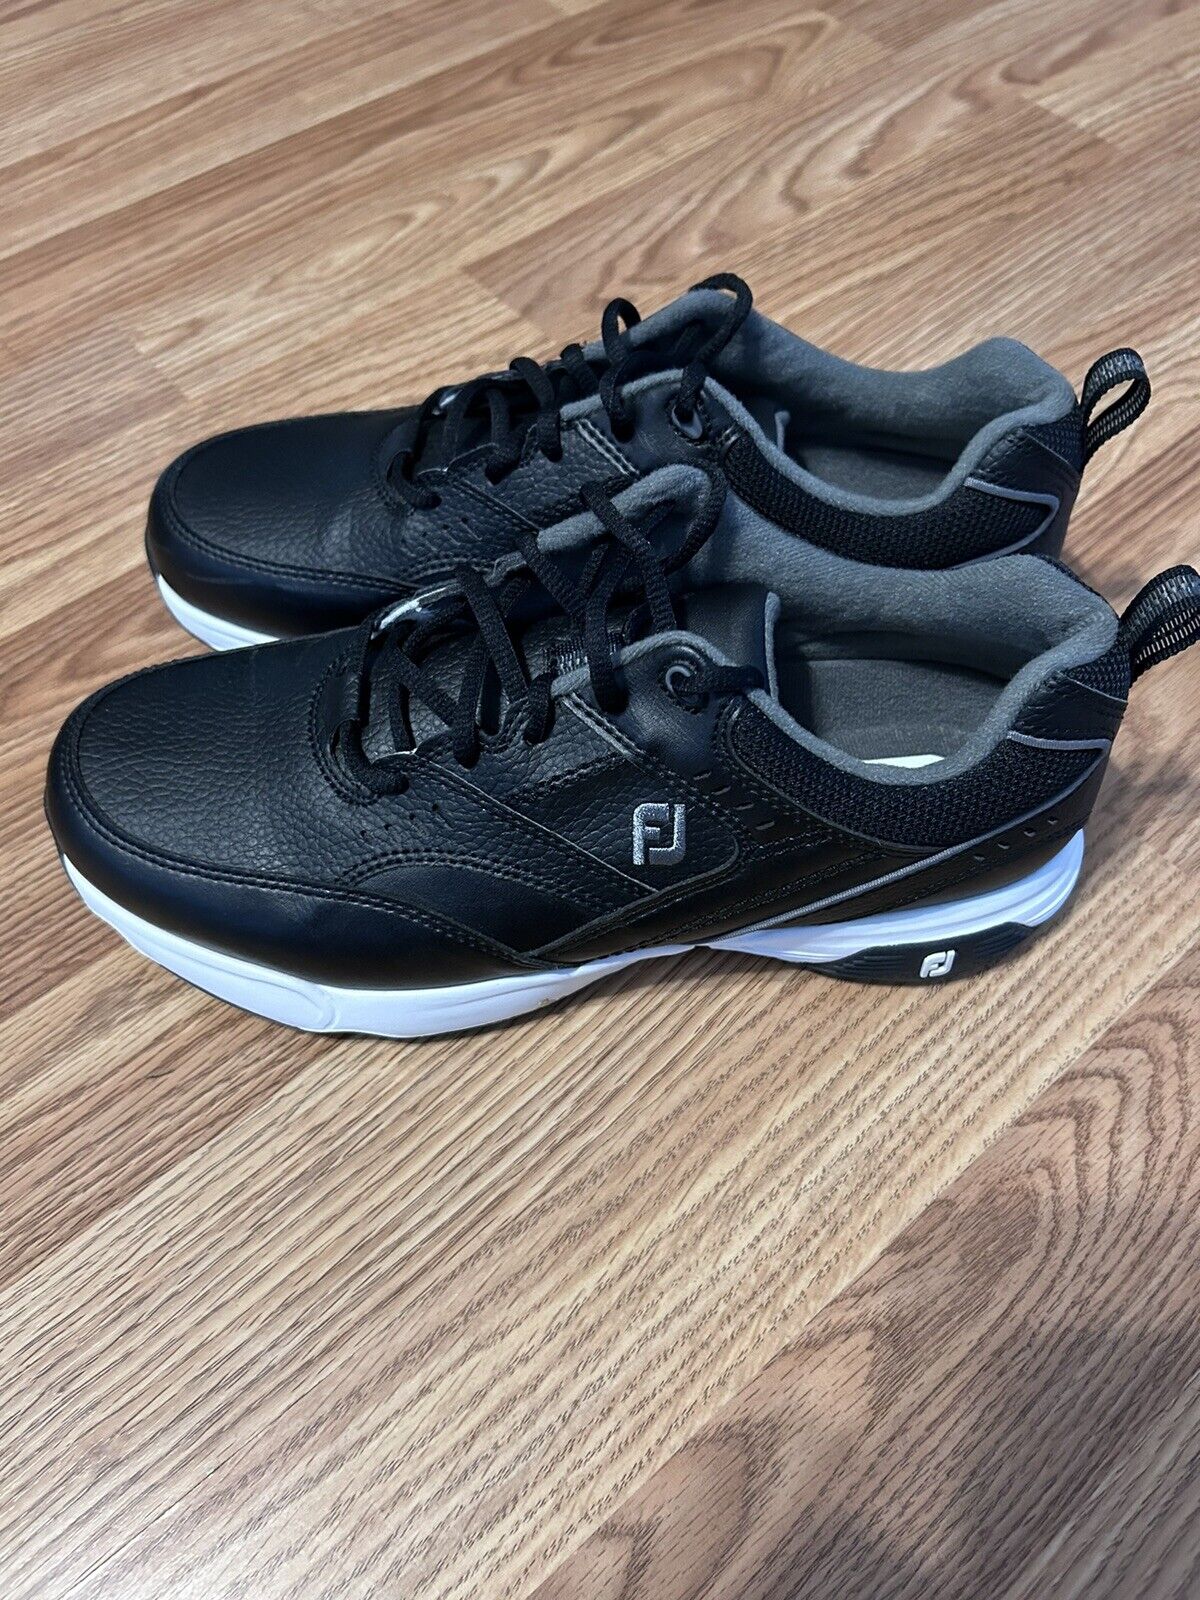 Men\'s 2021 FootJoy Athletic Specialty Golf Shoes 56736 Black - Size 9 Wide